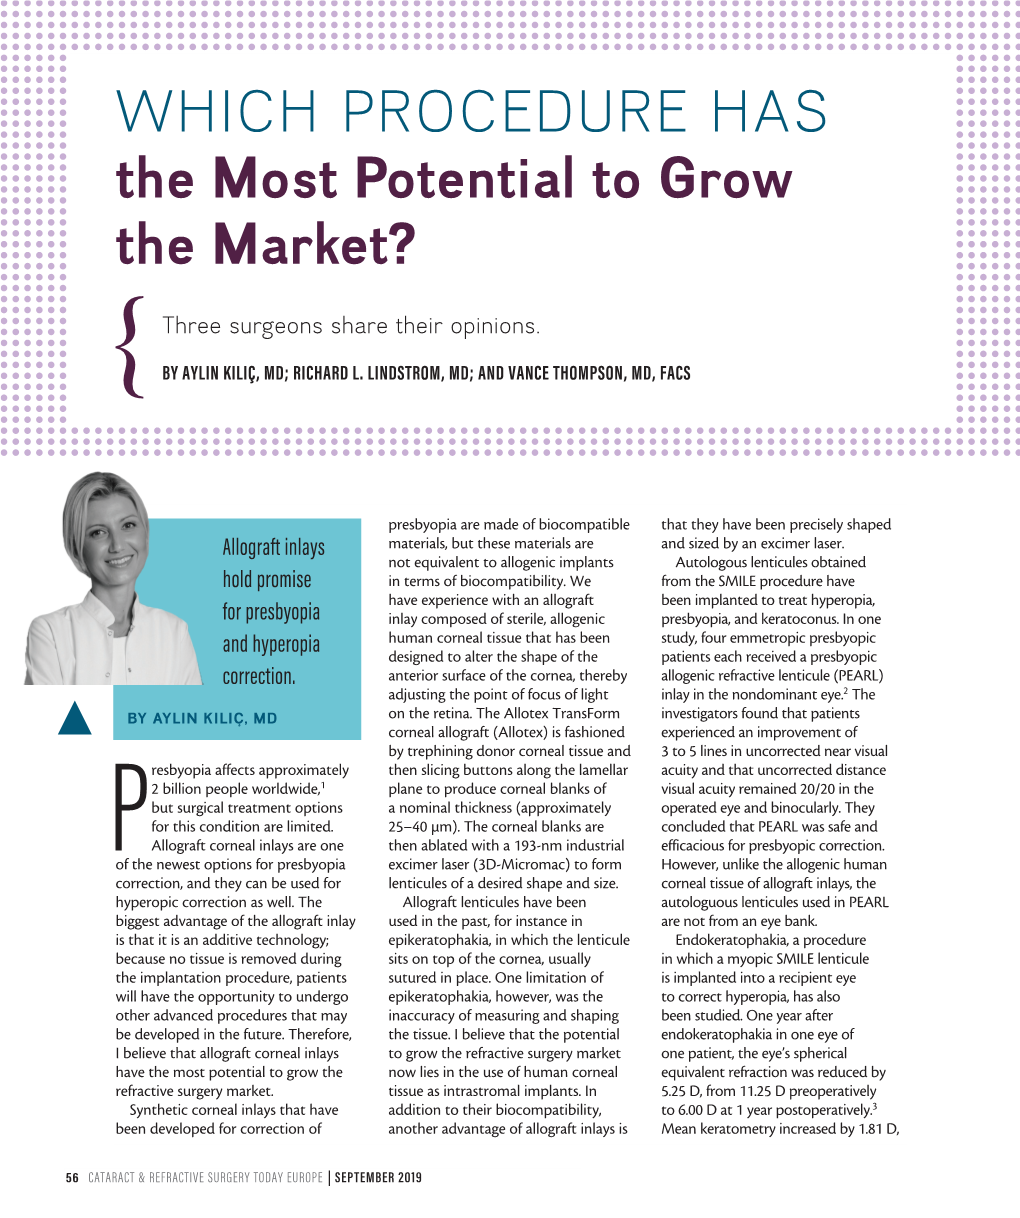 WHICH PROCEDURE HAS the Most Potential to Grow the Market?